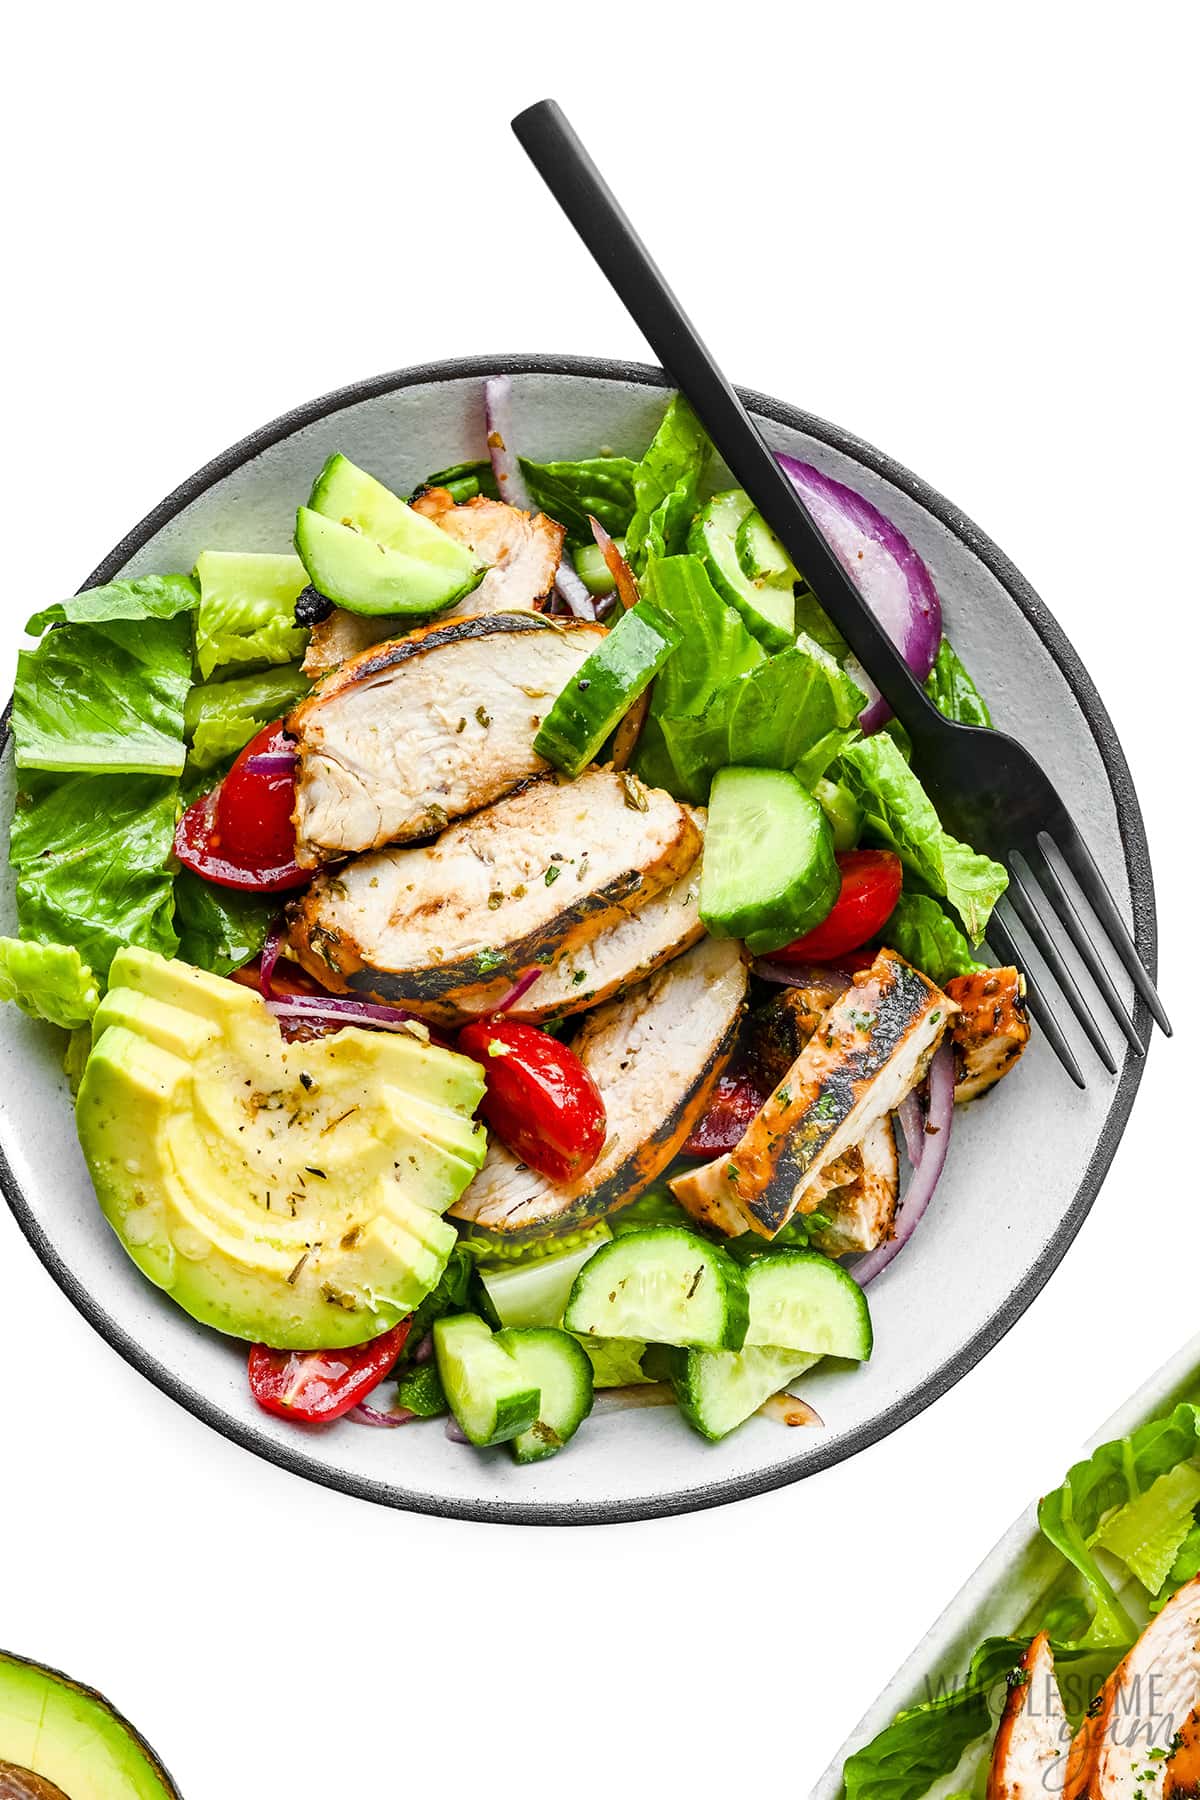 Salad with grilled chicken plated with fork.